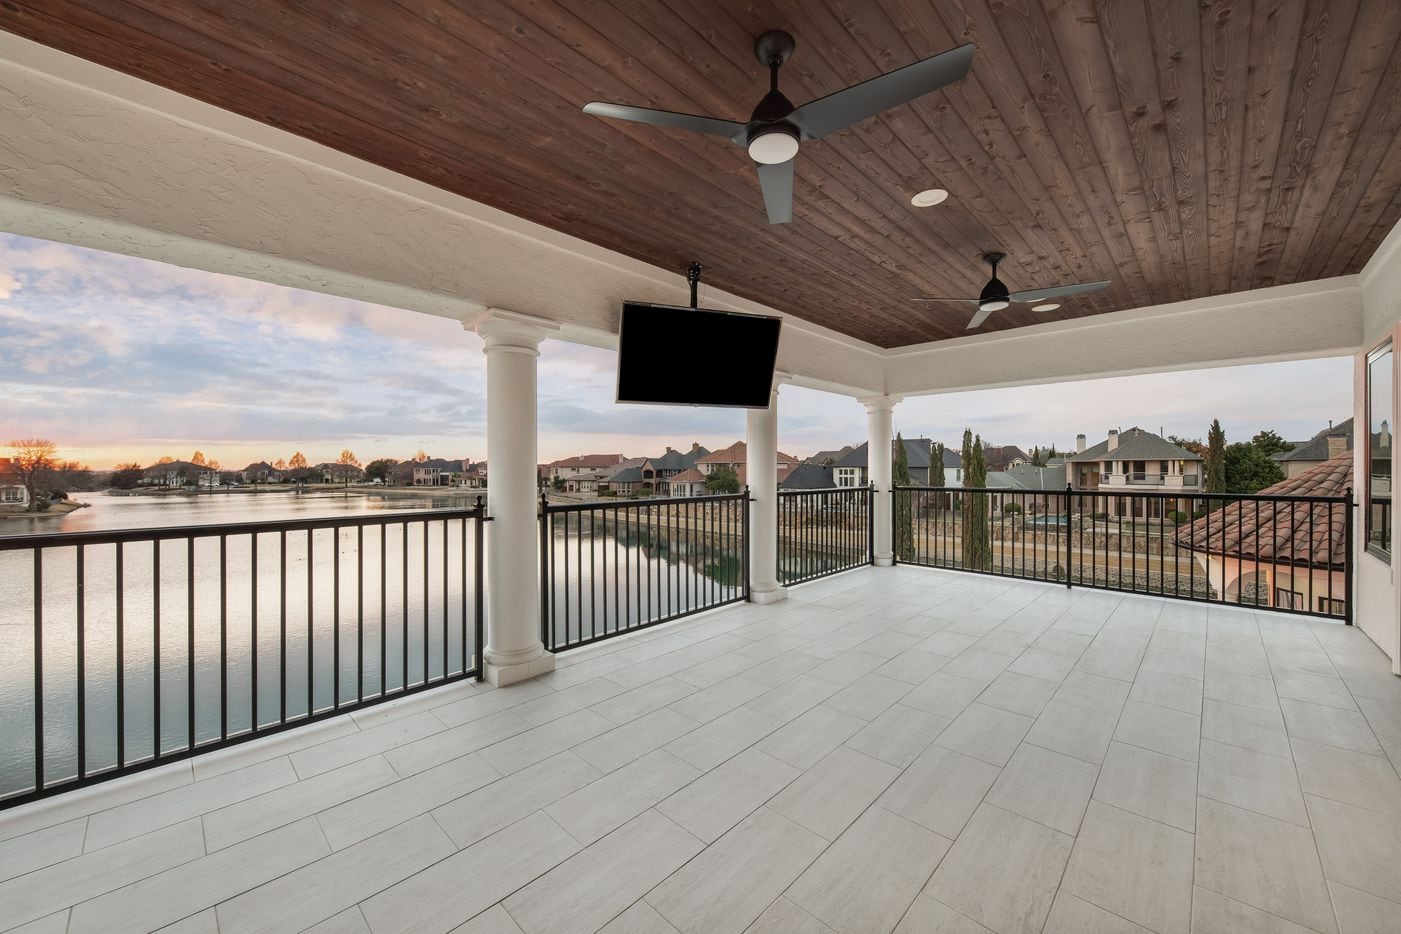 Take a look at the home 3999 Touraine Drive in Frisco.